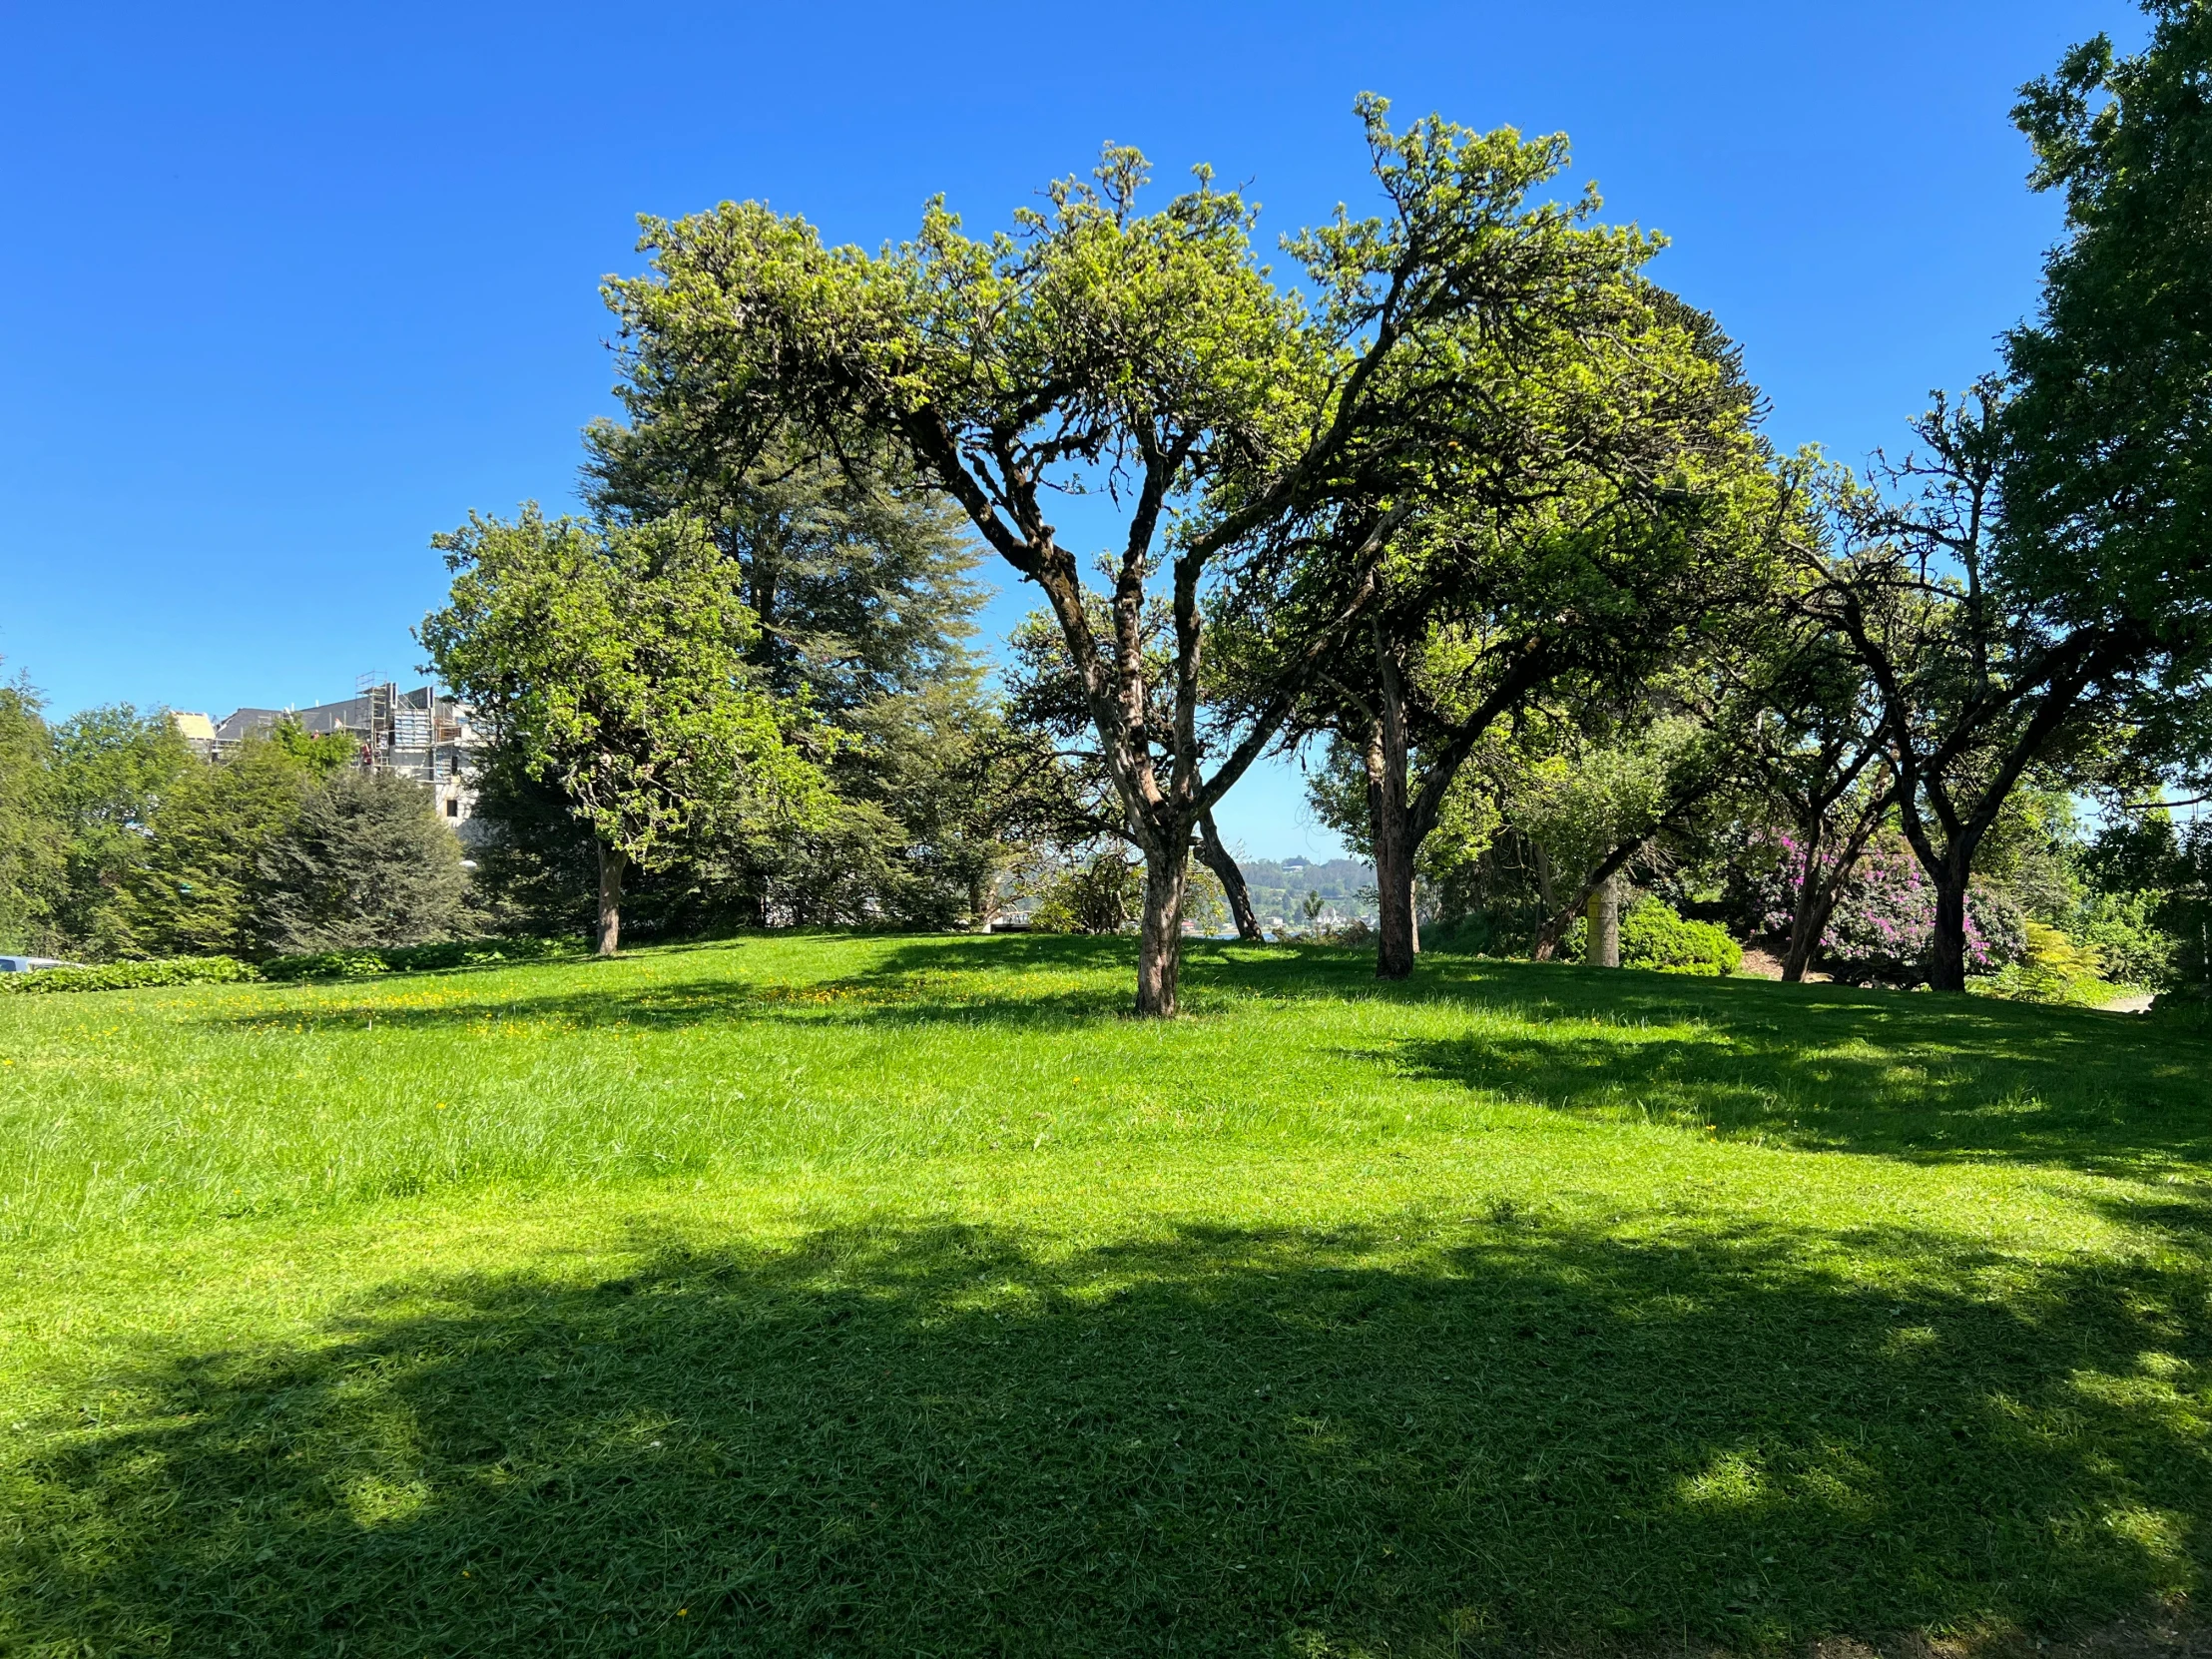 a grassy area under a few trees with some blue sky in the background